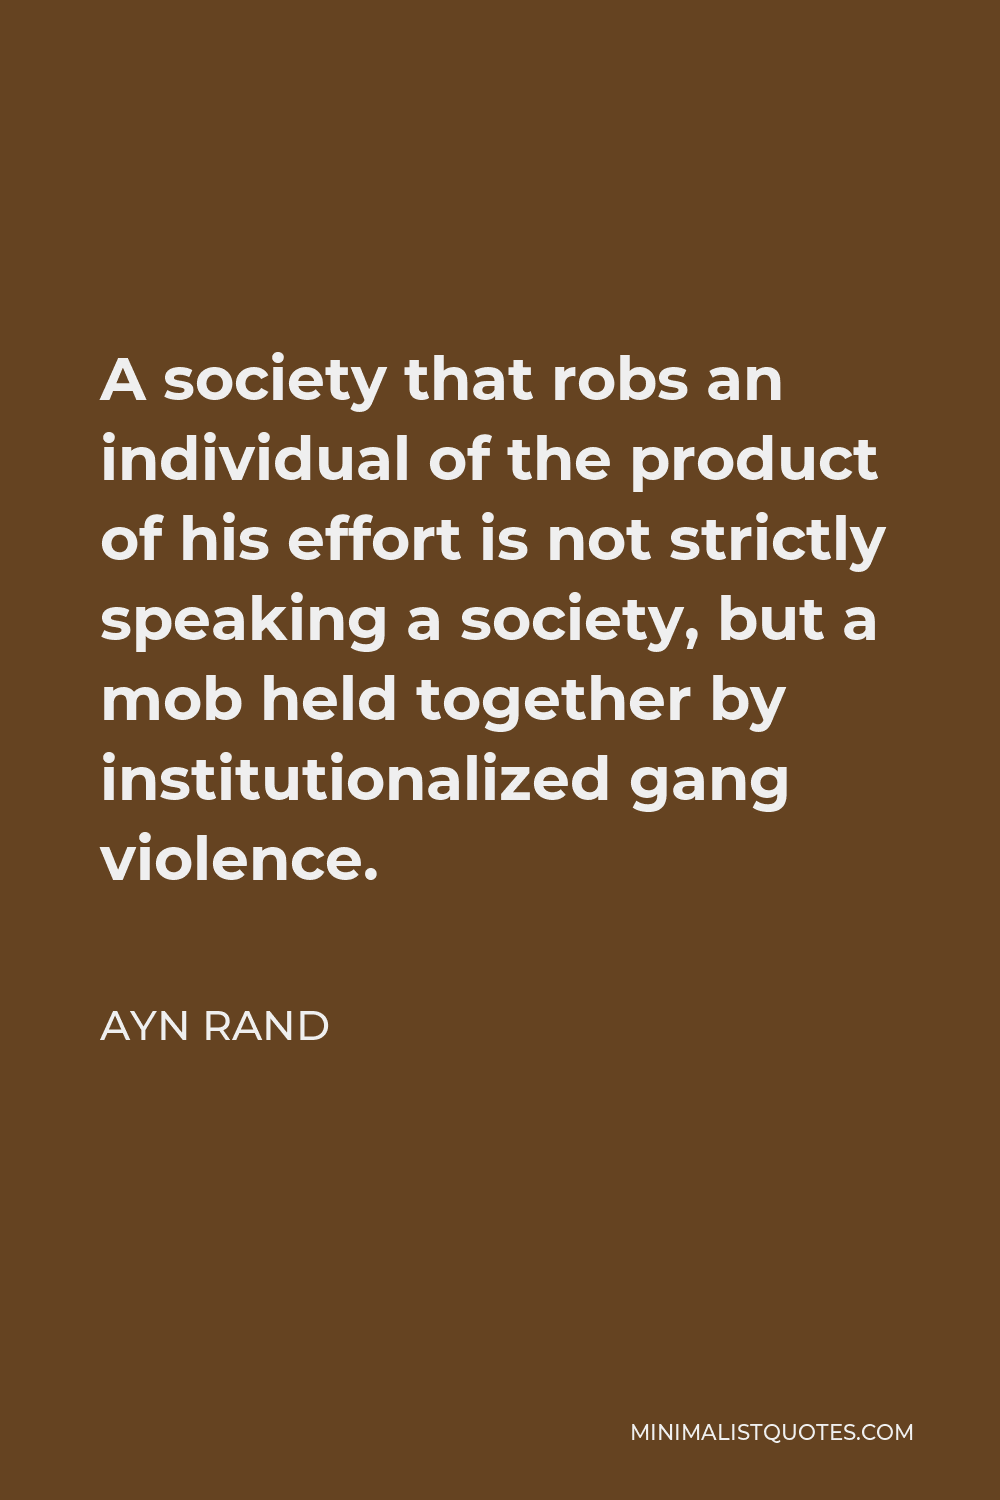 Ayn Rand Quote - A society that robs an individual of the product of his effort is not strictly speaking a society, but a mob held together by institutionalized gang violence.